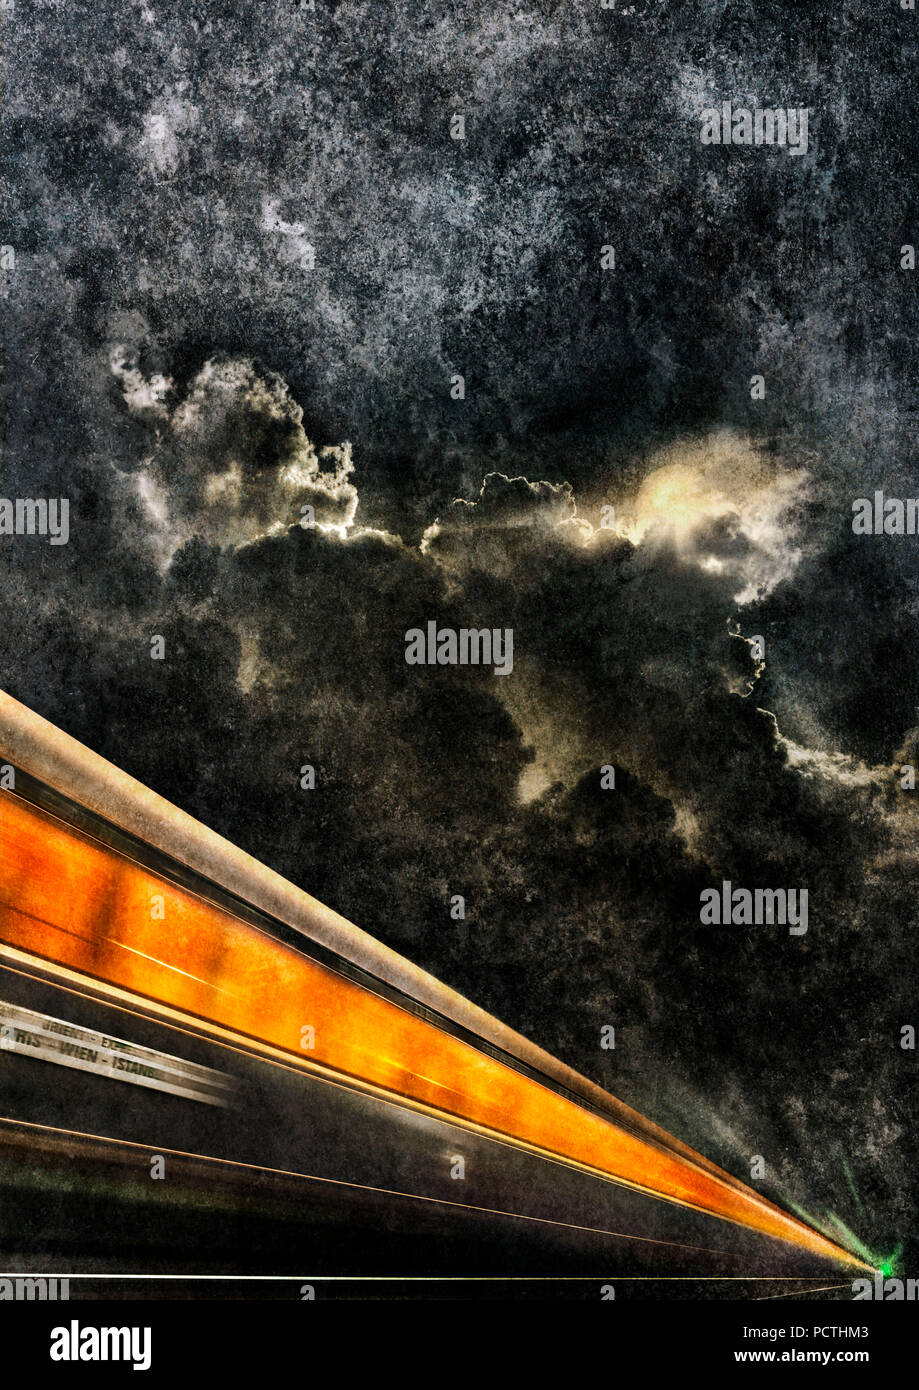 Train, night, moon shining through the clouds, train running sign, Orient Express, motion blur, [M], retouched, photography, RailArt Stock Photo